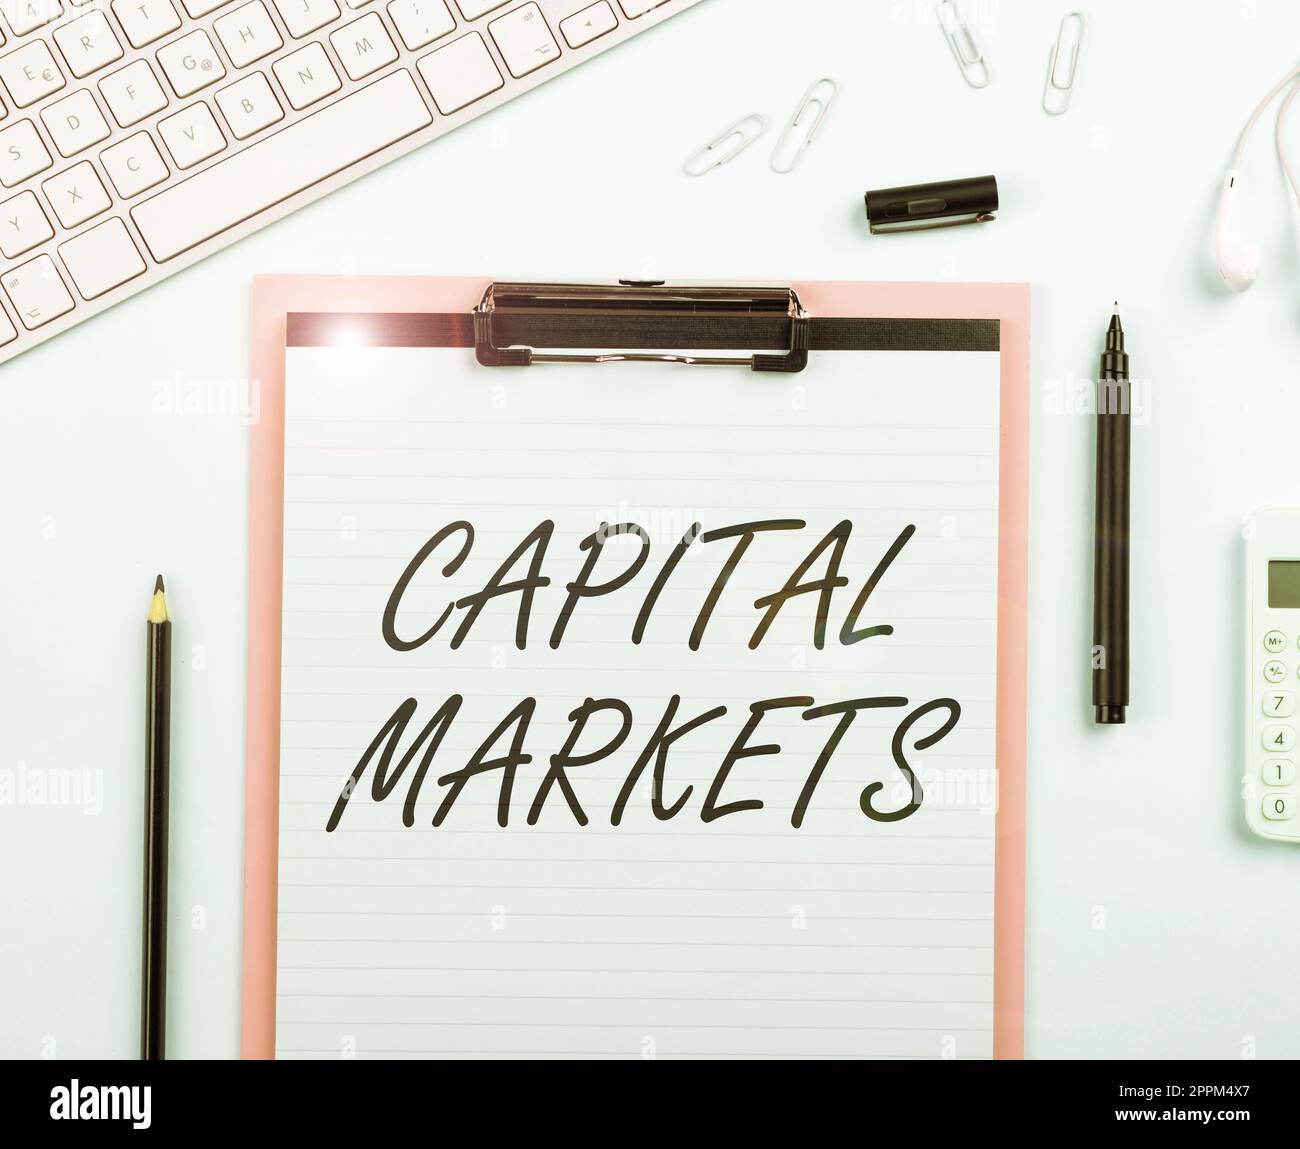 Text caption presenting Capital Markets. Business showcase Allow businesses to raise funds by providing market security Stock Photo